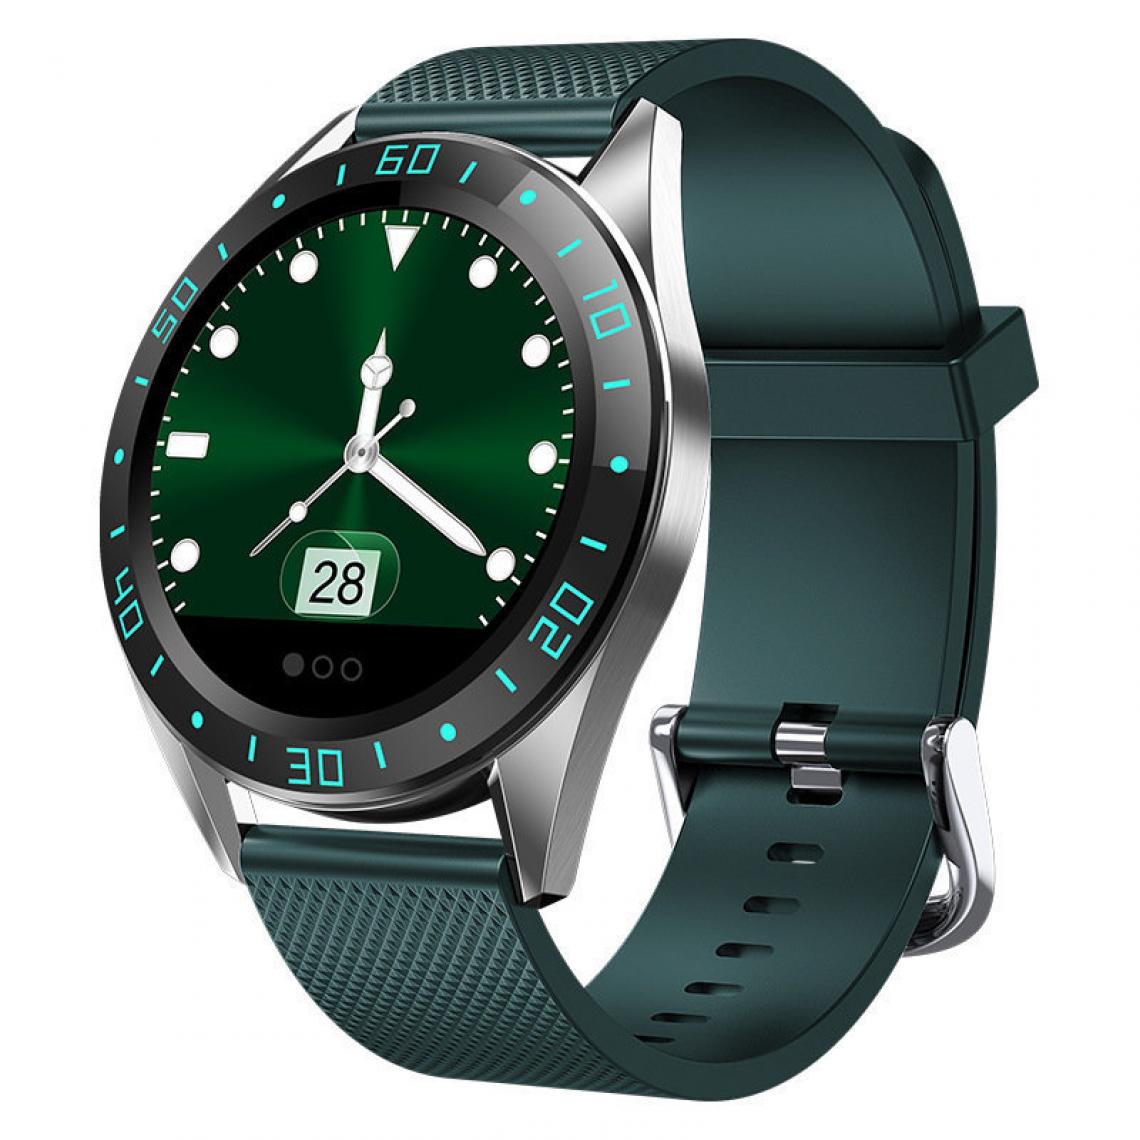 Chronotech Montres - Smart watch Waterproof Activity Fitness Tracker Heart Rate Monitor Blood Pressure (green) - Montre connectée